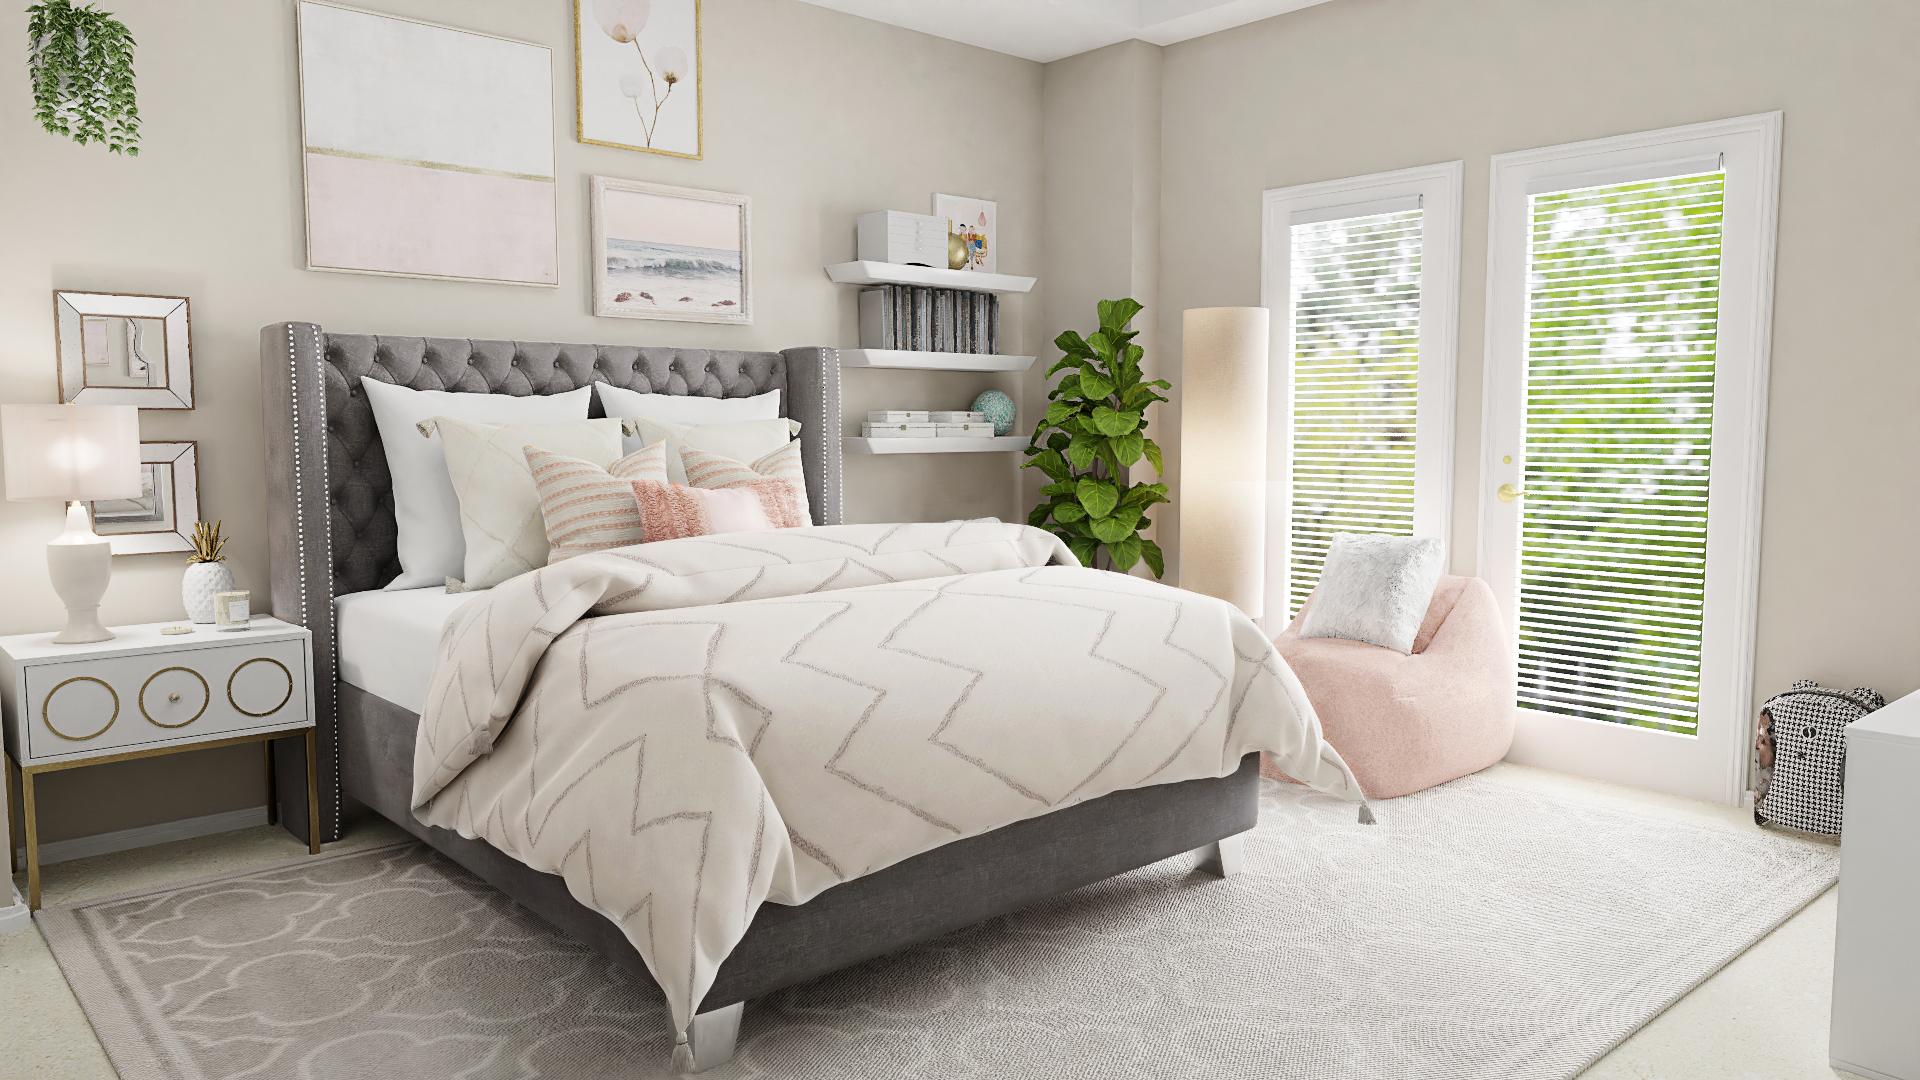 A Transitional Bedroom With A Twist of Glamor